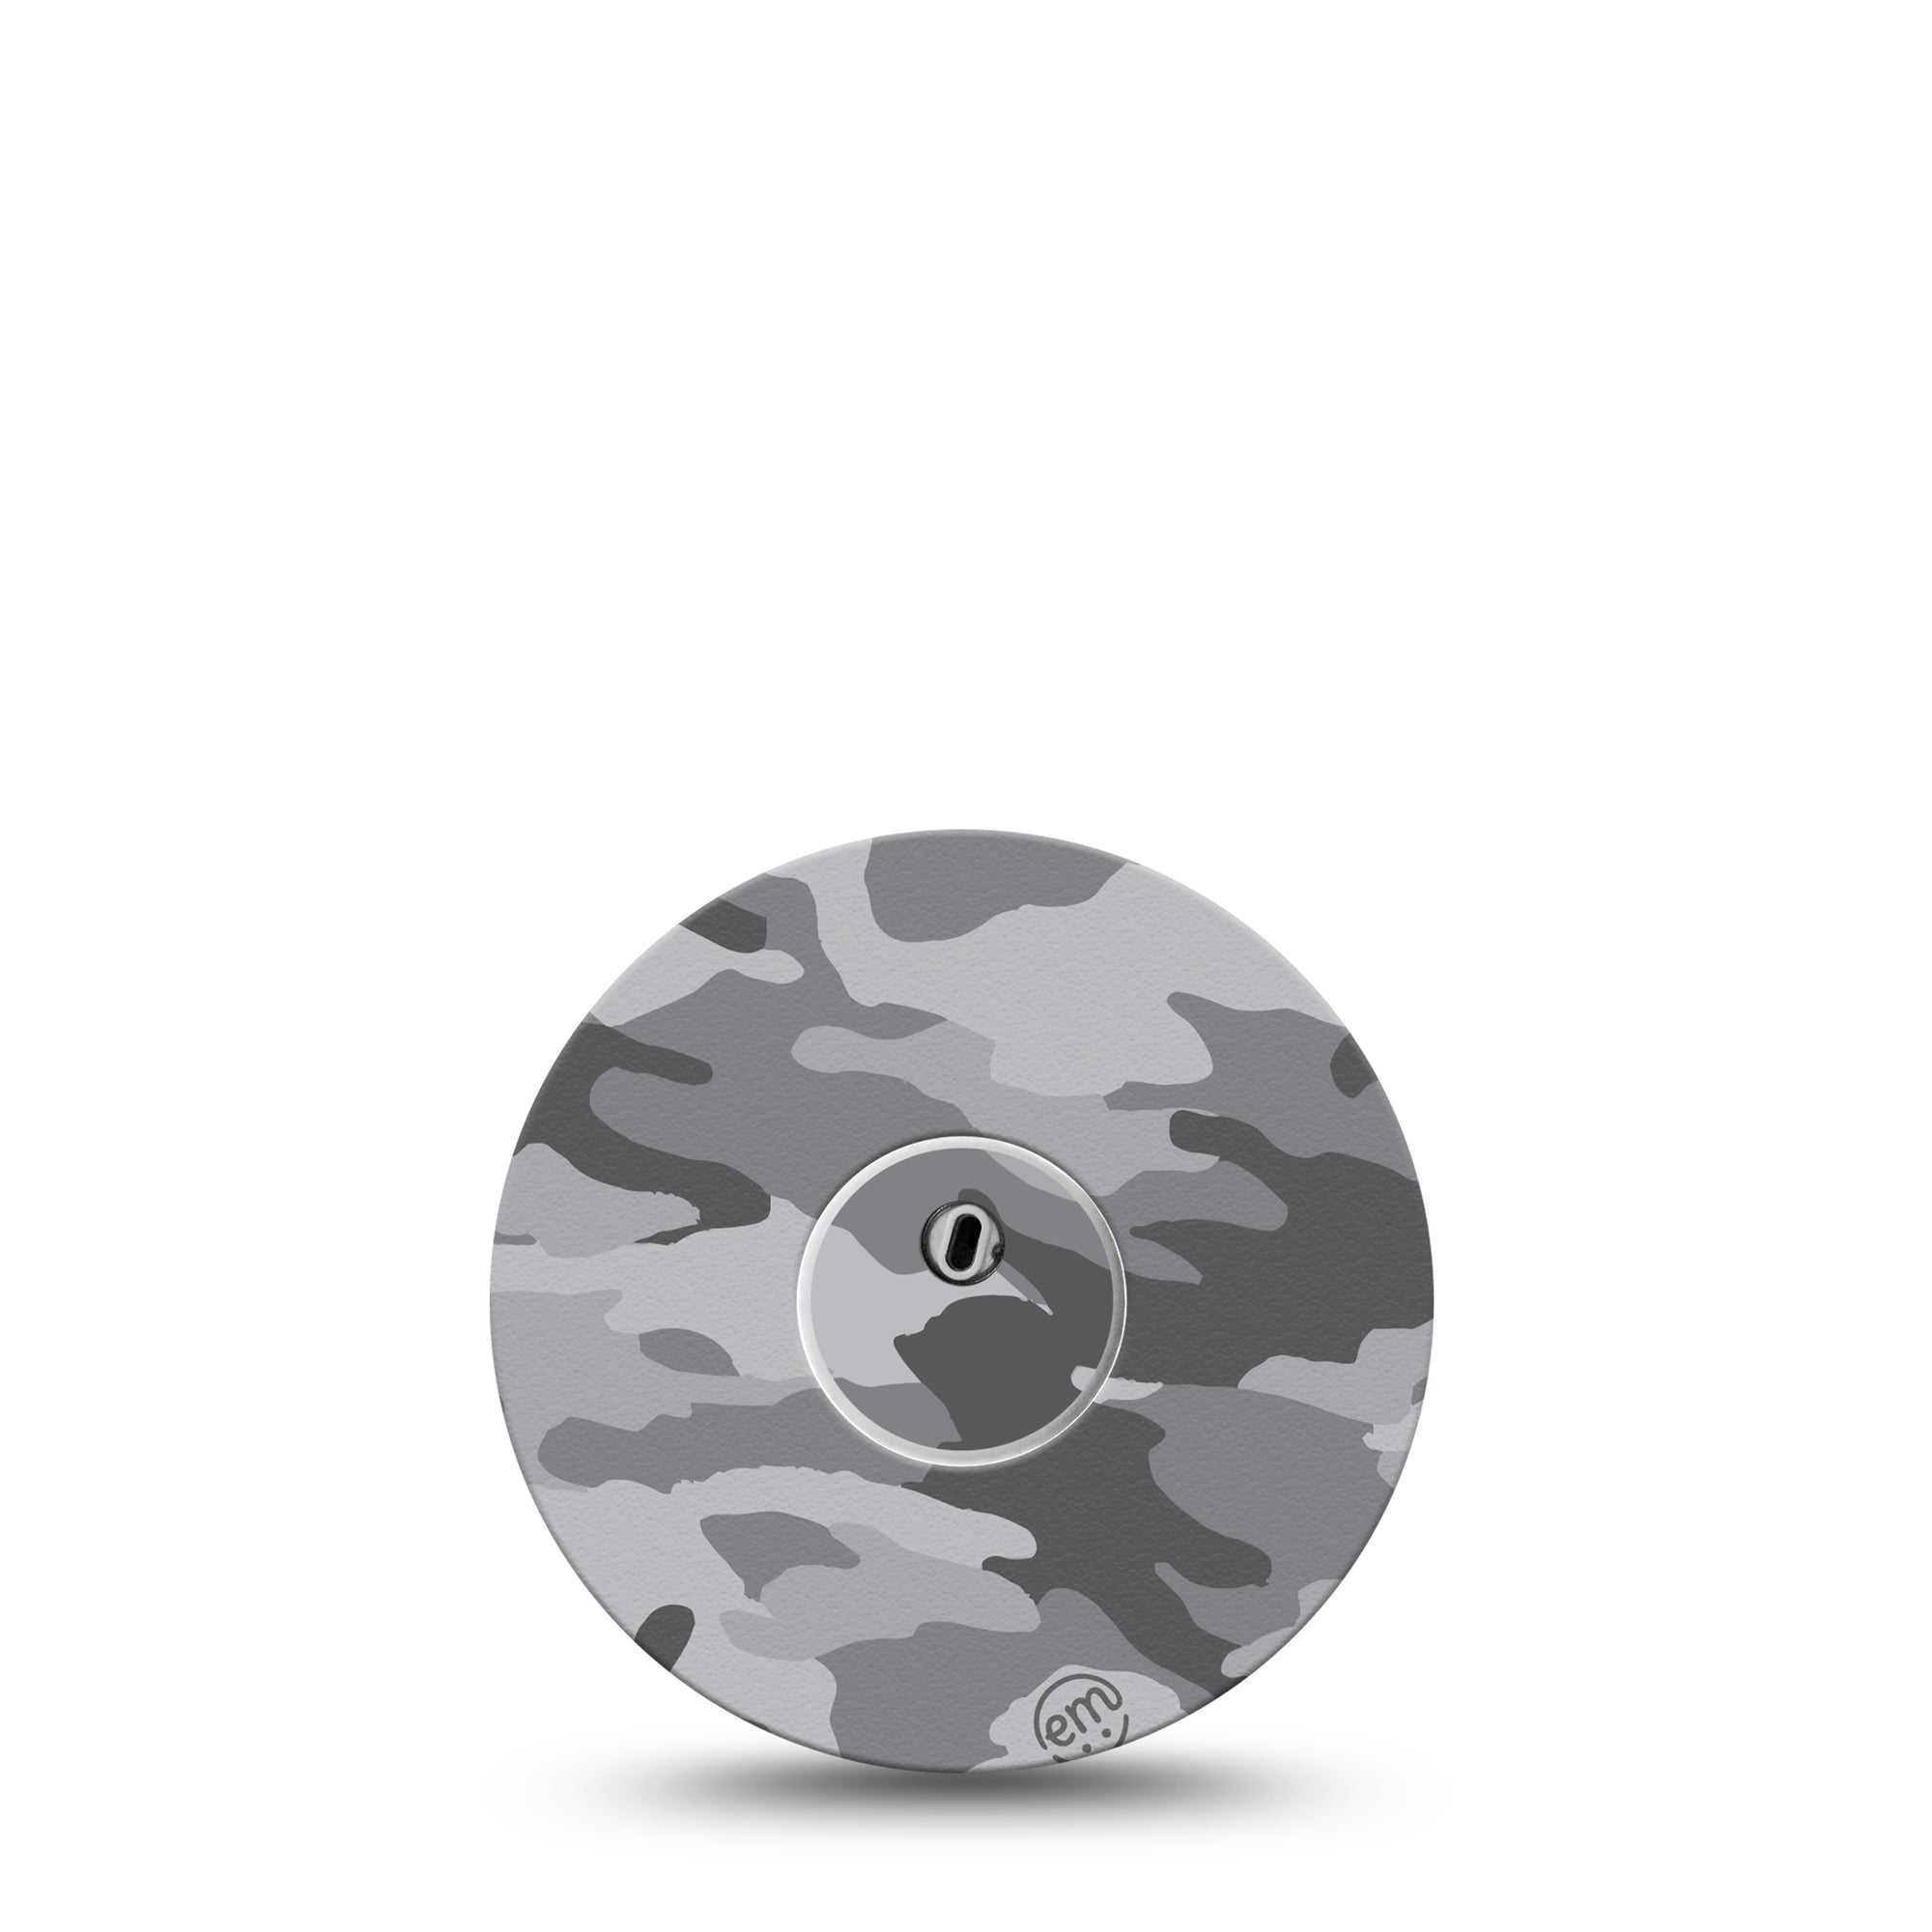 ExpressionMed Gray Camo Libre 3 Transmitter Sticker, Single, Gray Camouflage Center Vinyl Sticker CGM Design with Matching Libre 3 Fixing Ring Patch